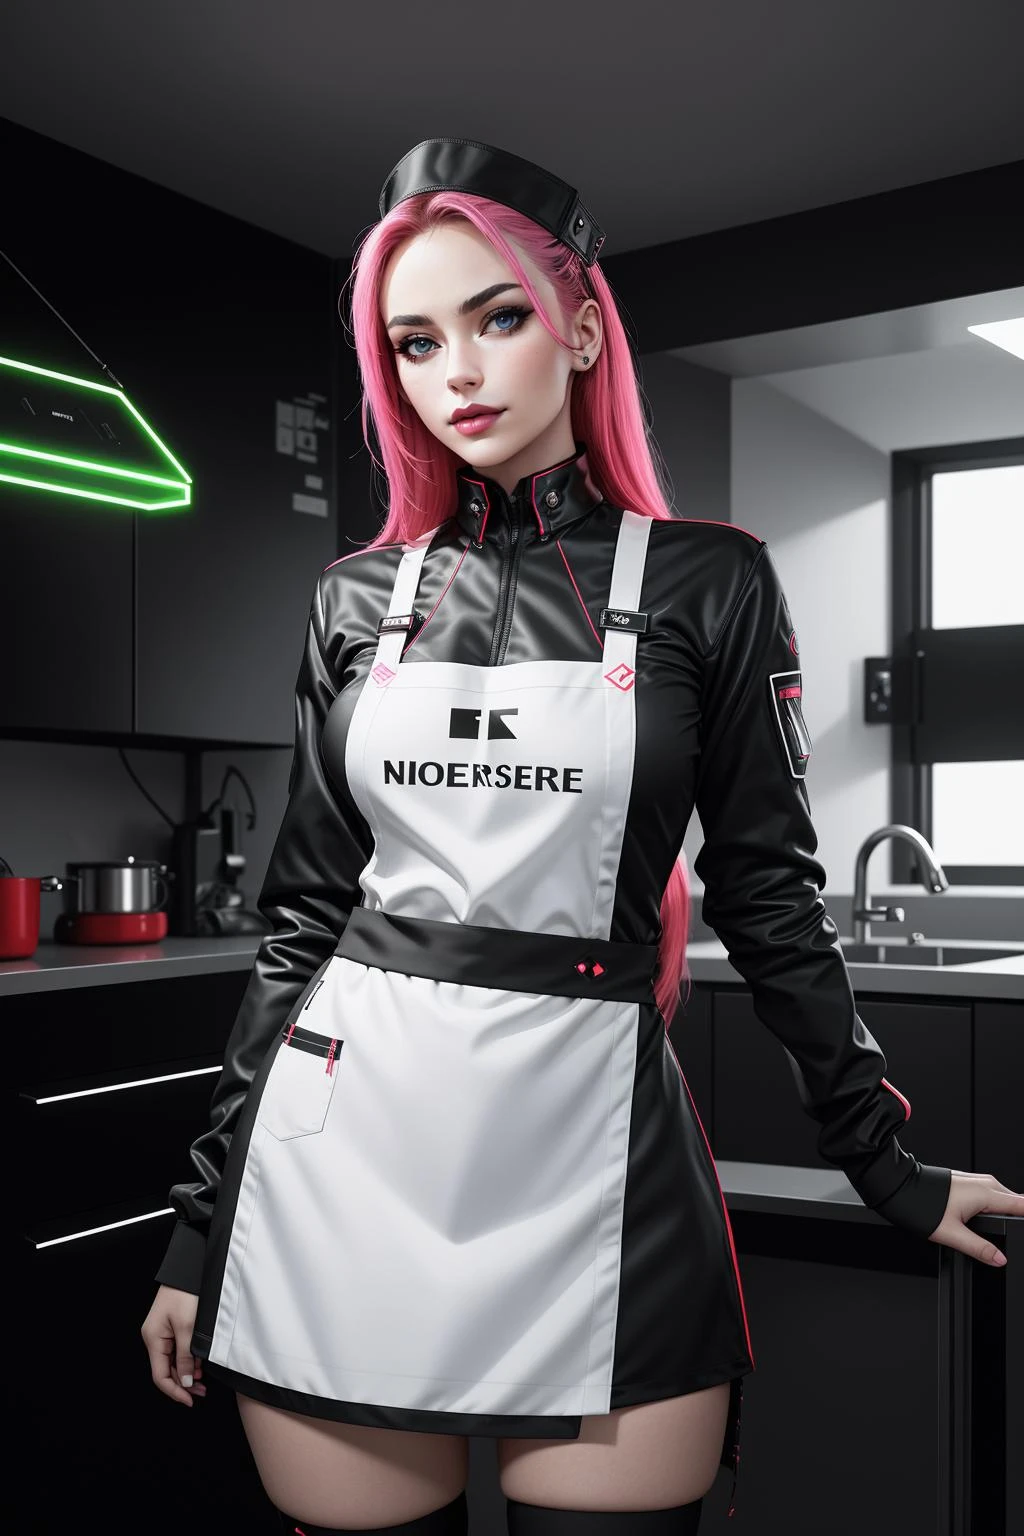 ((Masterpiece, best quality,edgQuality)),smirk,smug,((neons, electric circuits,edgFut_clothing))
edgApron,edgFut_clothing, a woman in a futuristic suit and apron standing in a room ,wearing edgFut_clothing,wearing edgApron
 